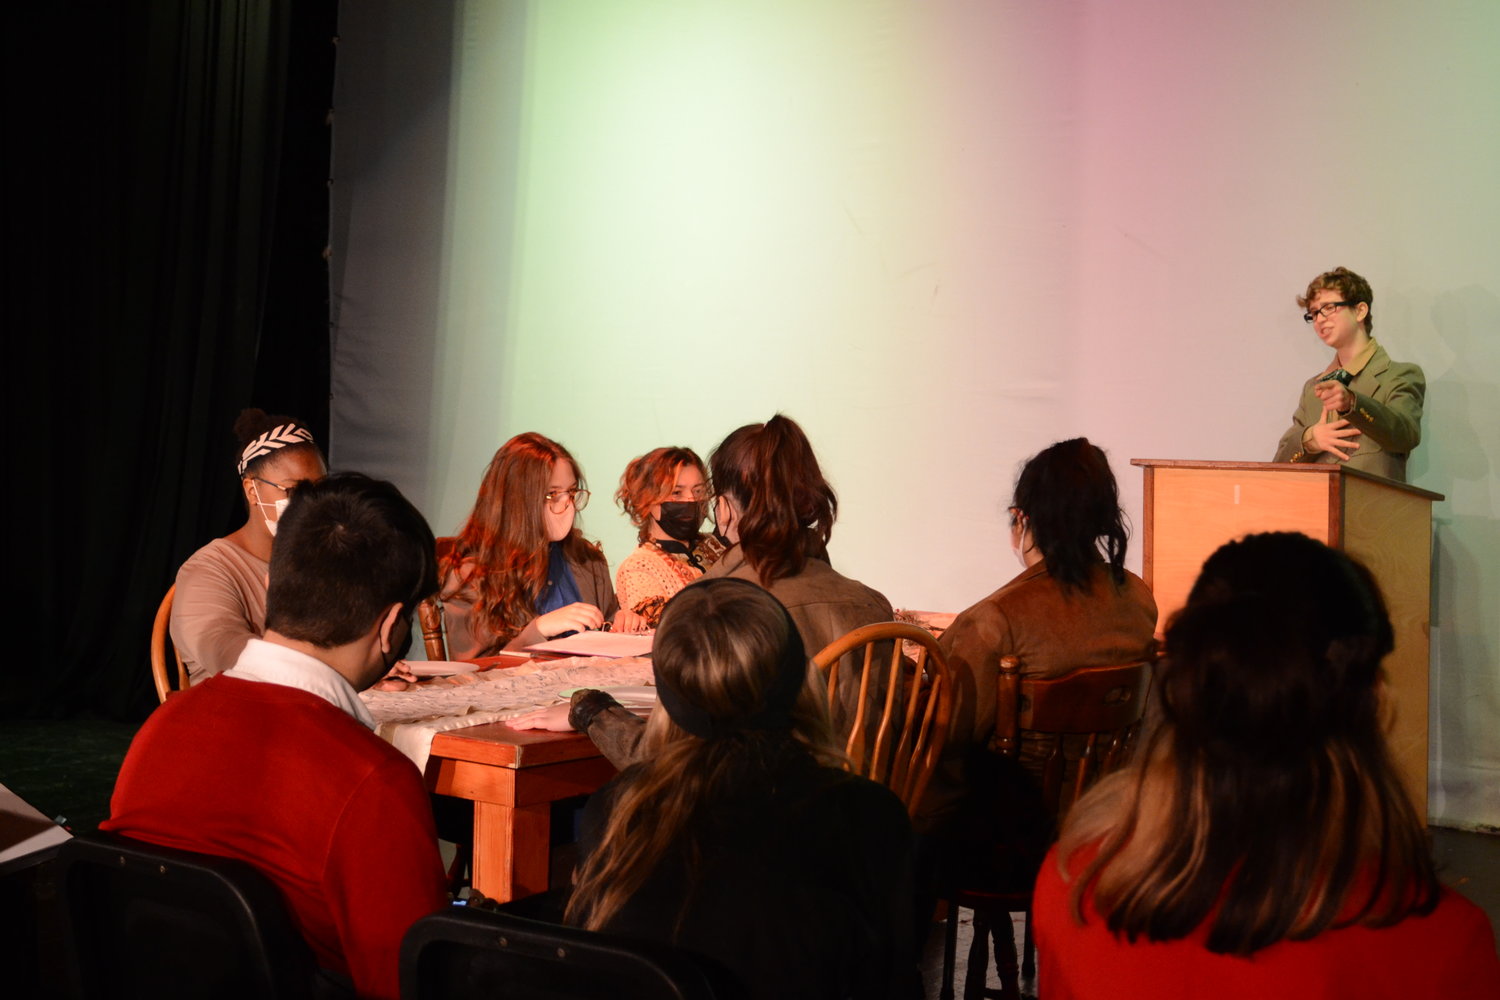 Liam Reich leads a family ‘press conference’ at Thanksgiving dinner during ‘Talking Points,’ which features fellow students Arabella Pichette, Seren Davies, Amani Jackson, Mariah Rogers, and Mia Shaw. It was part of the theater students' Fall Play in 2021.